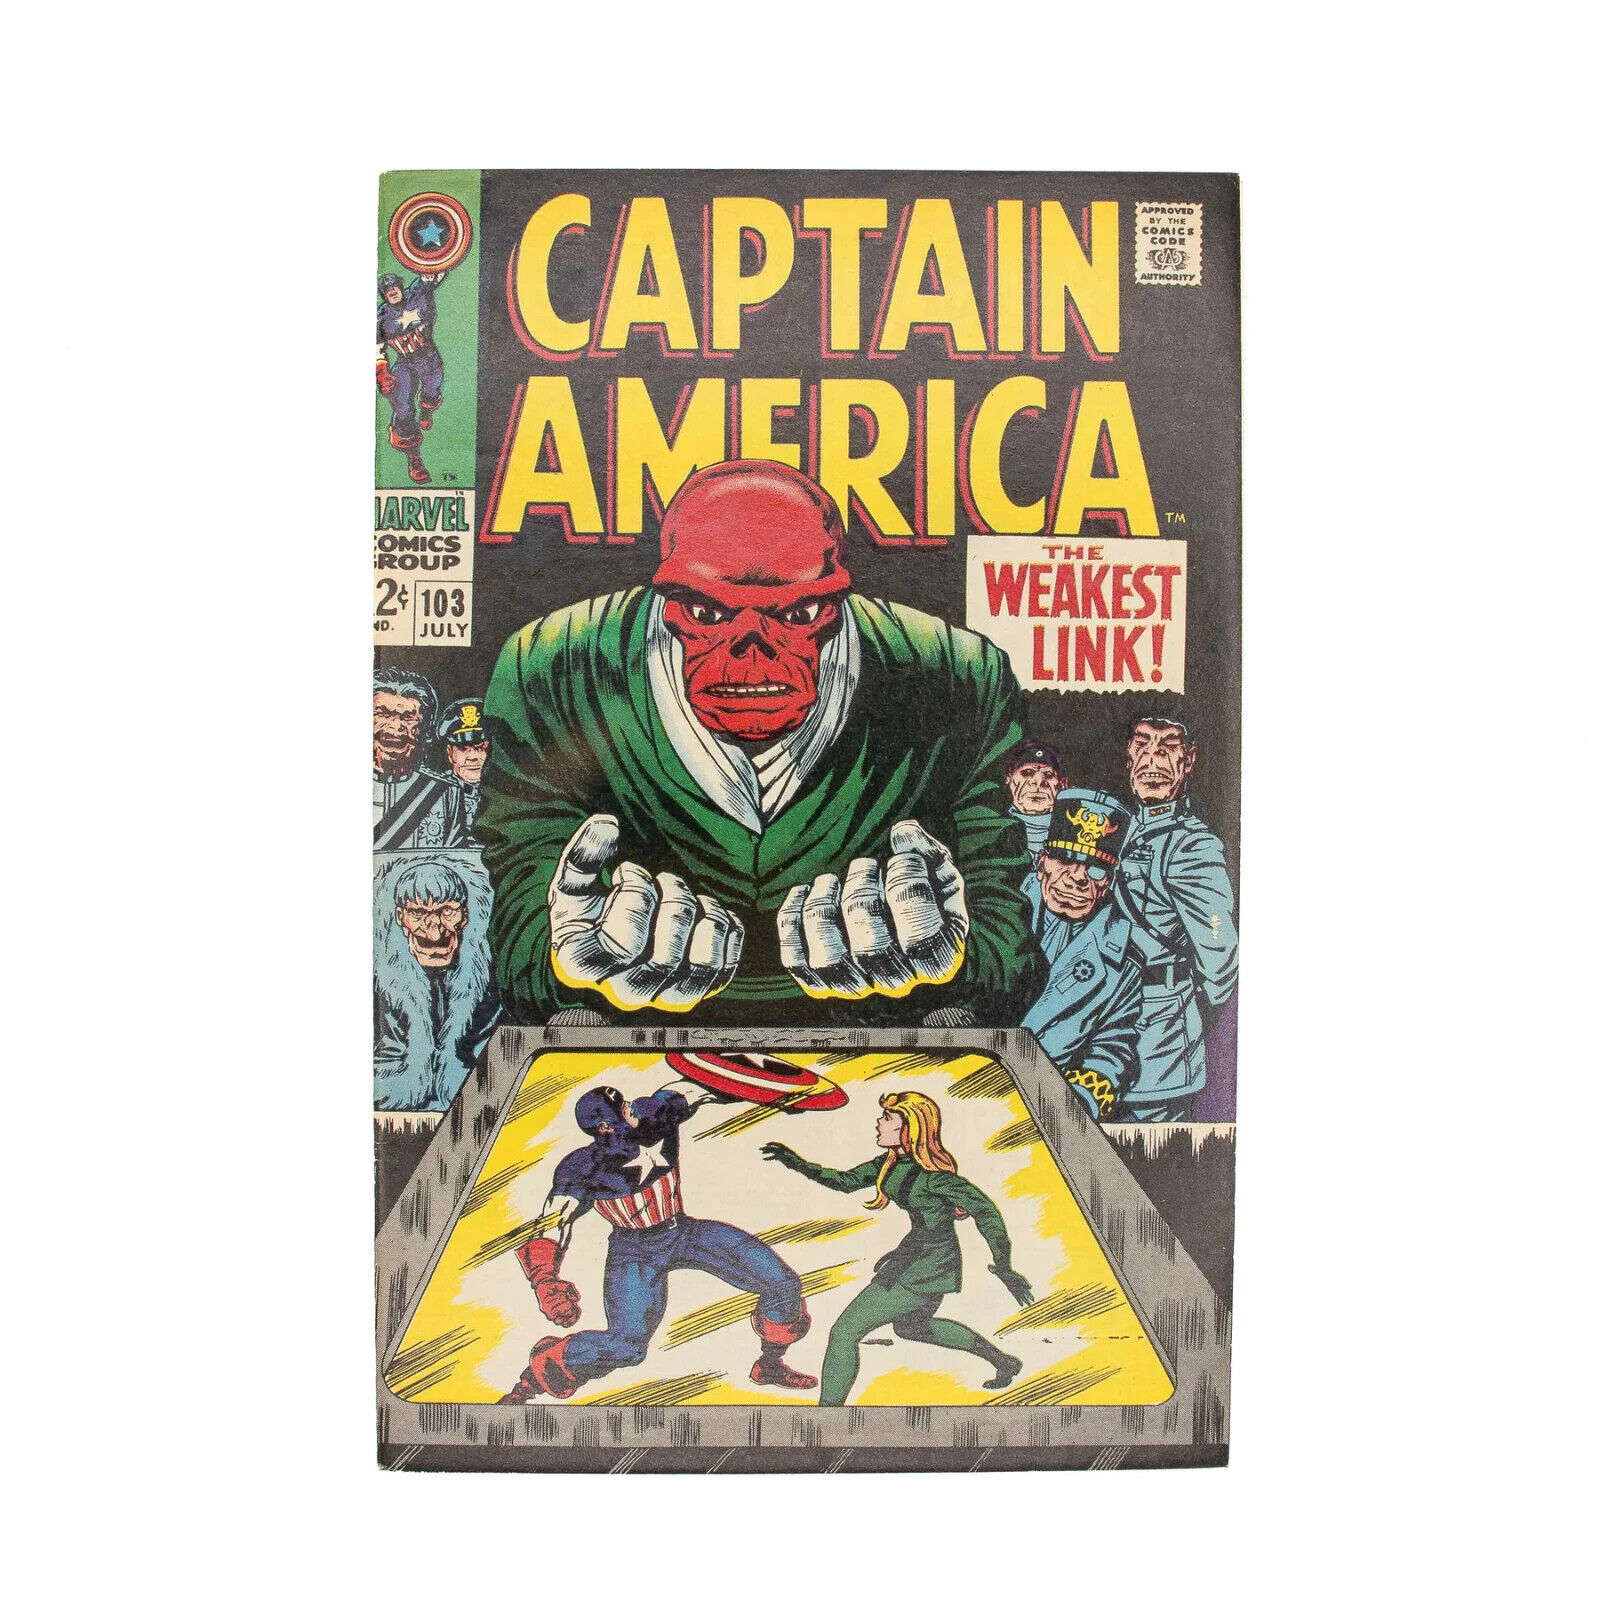 Captain America Volume 1, Issue #103 (July 1968)